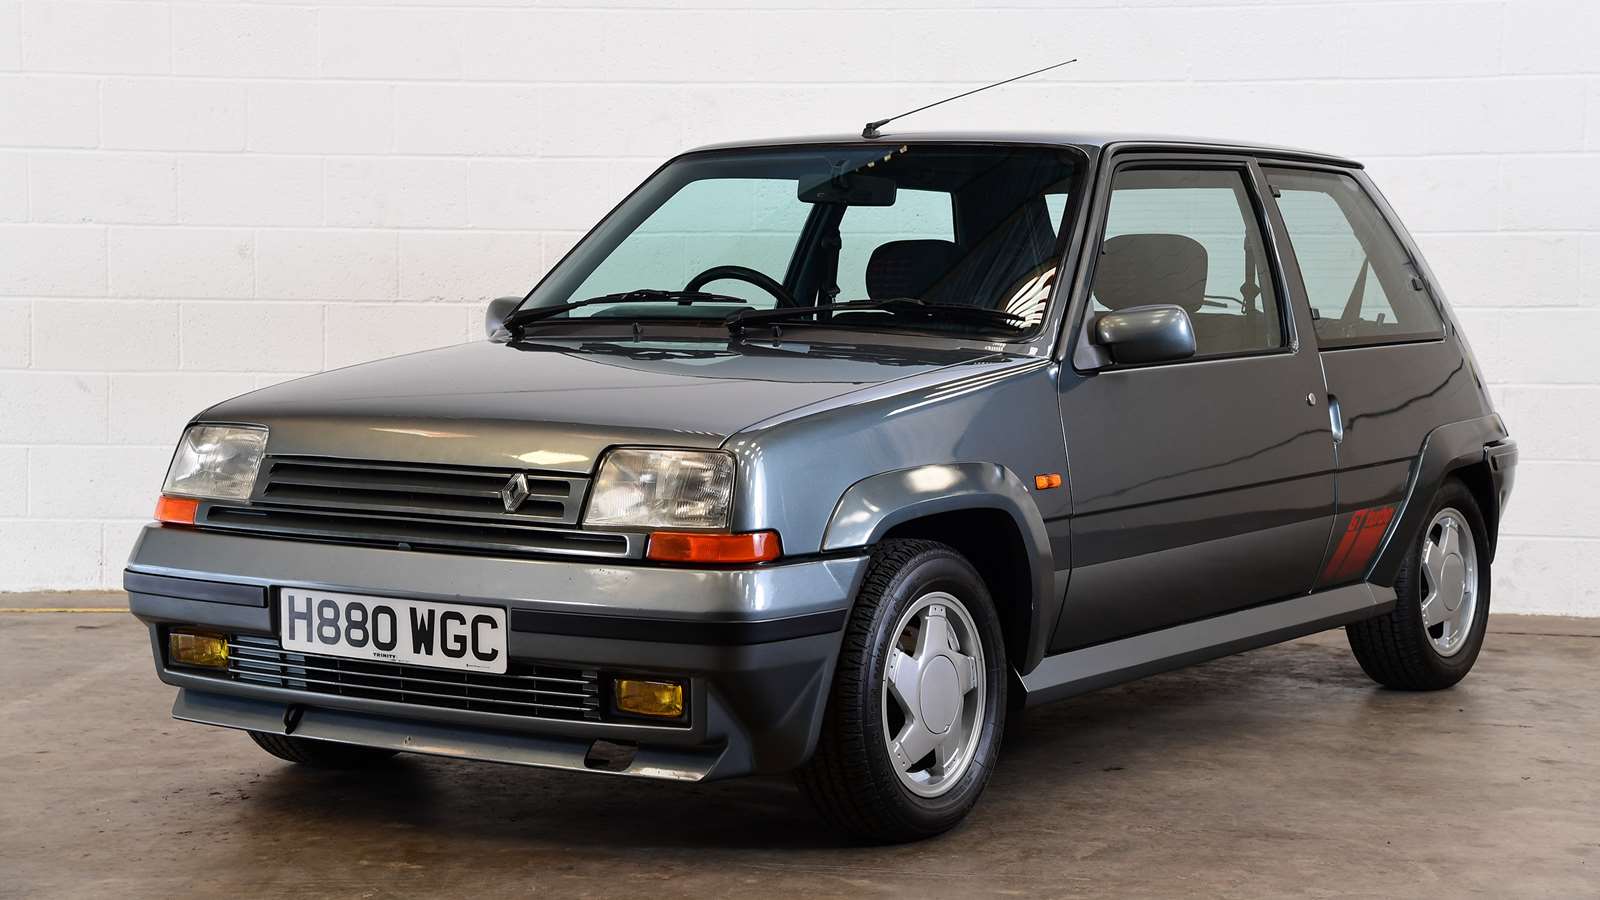 The Renault 5 GT Turbo is still a hero